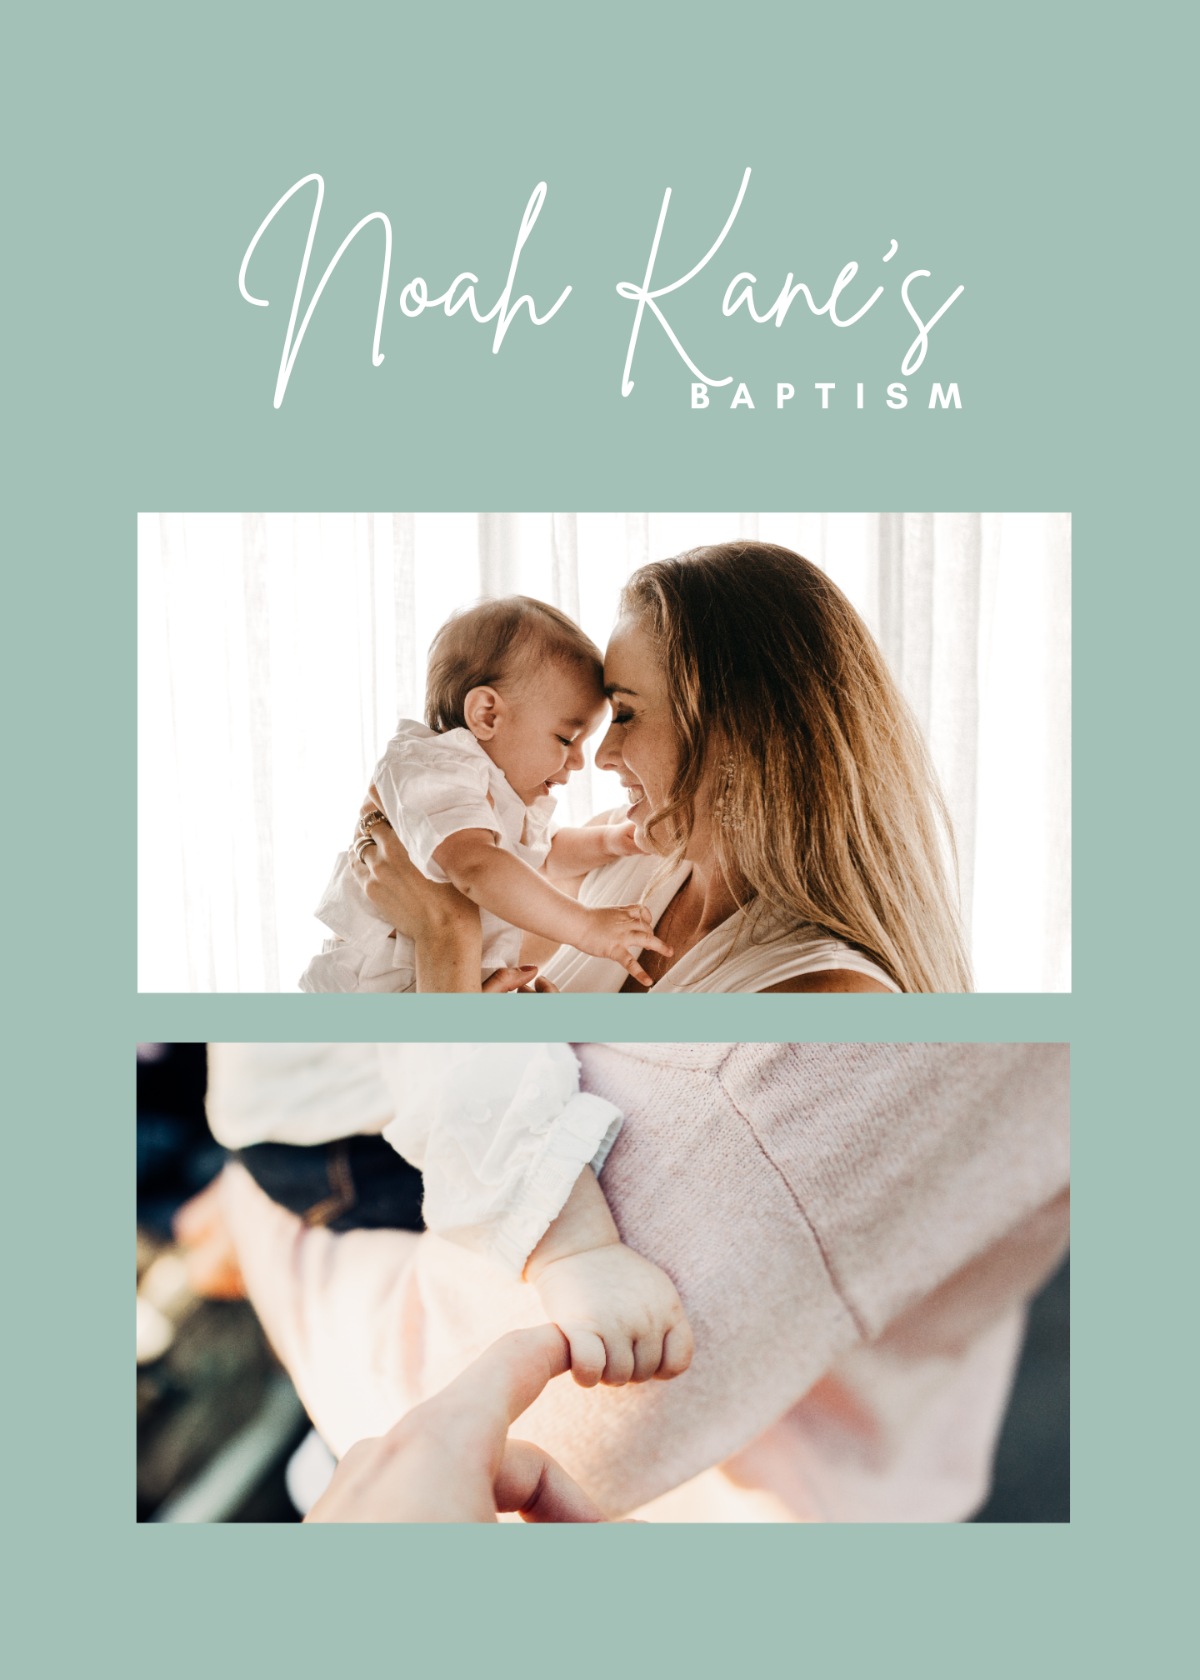 Baptism Photo Booth Template